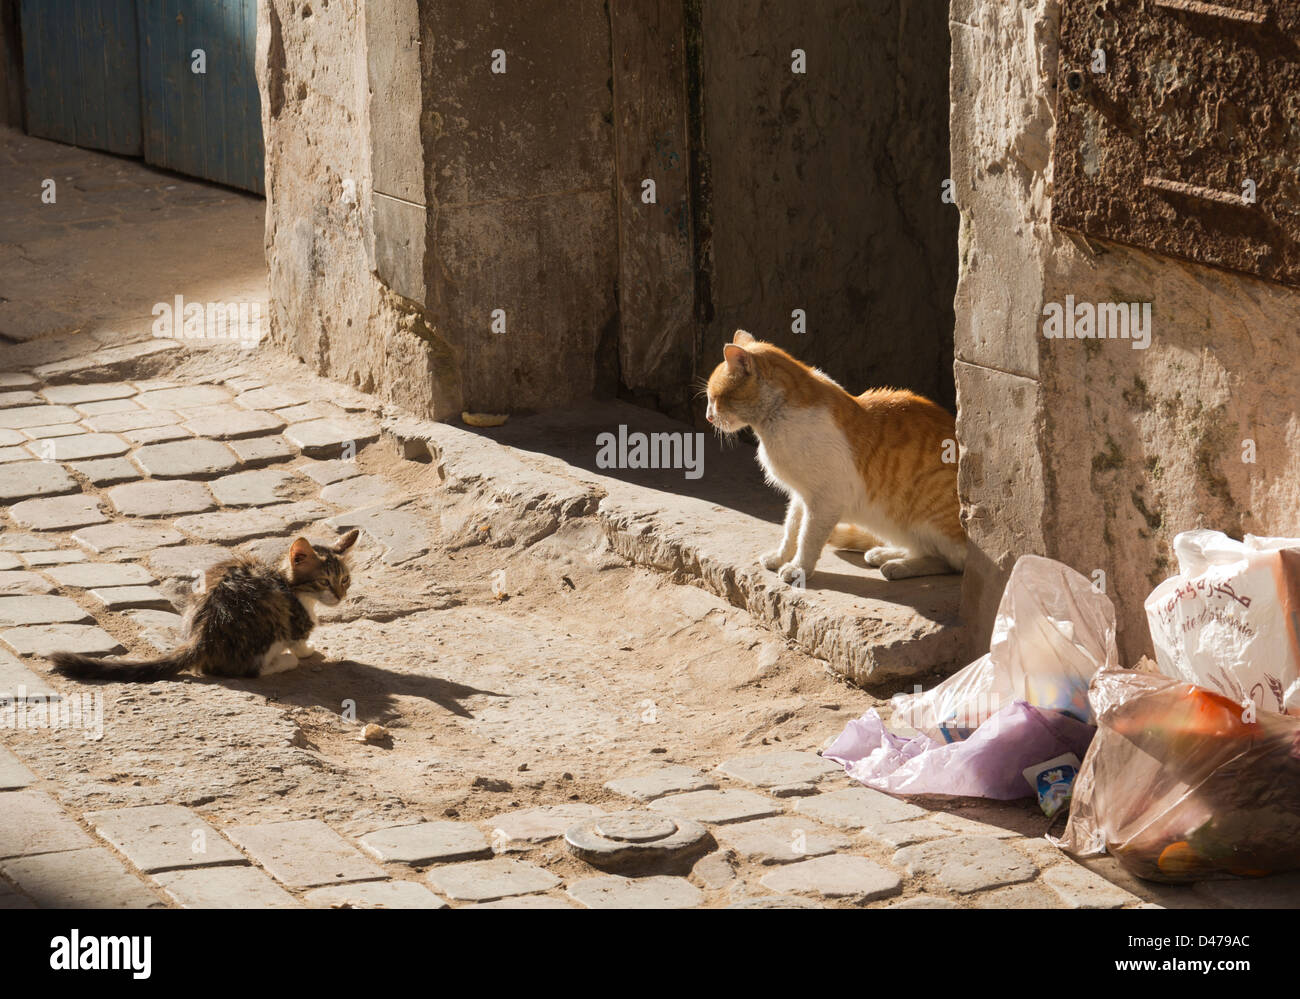 One kitten and a cat at an entrance to an alleyway Stock Photo